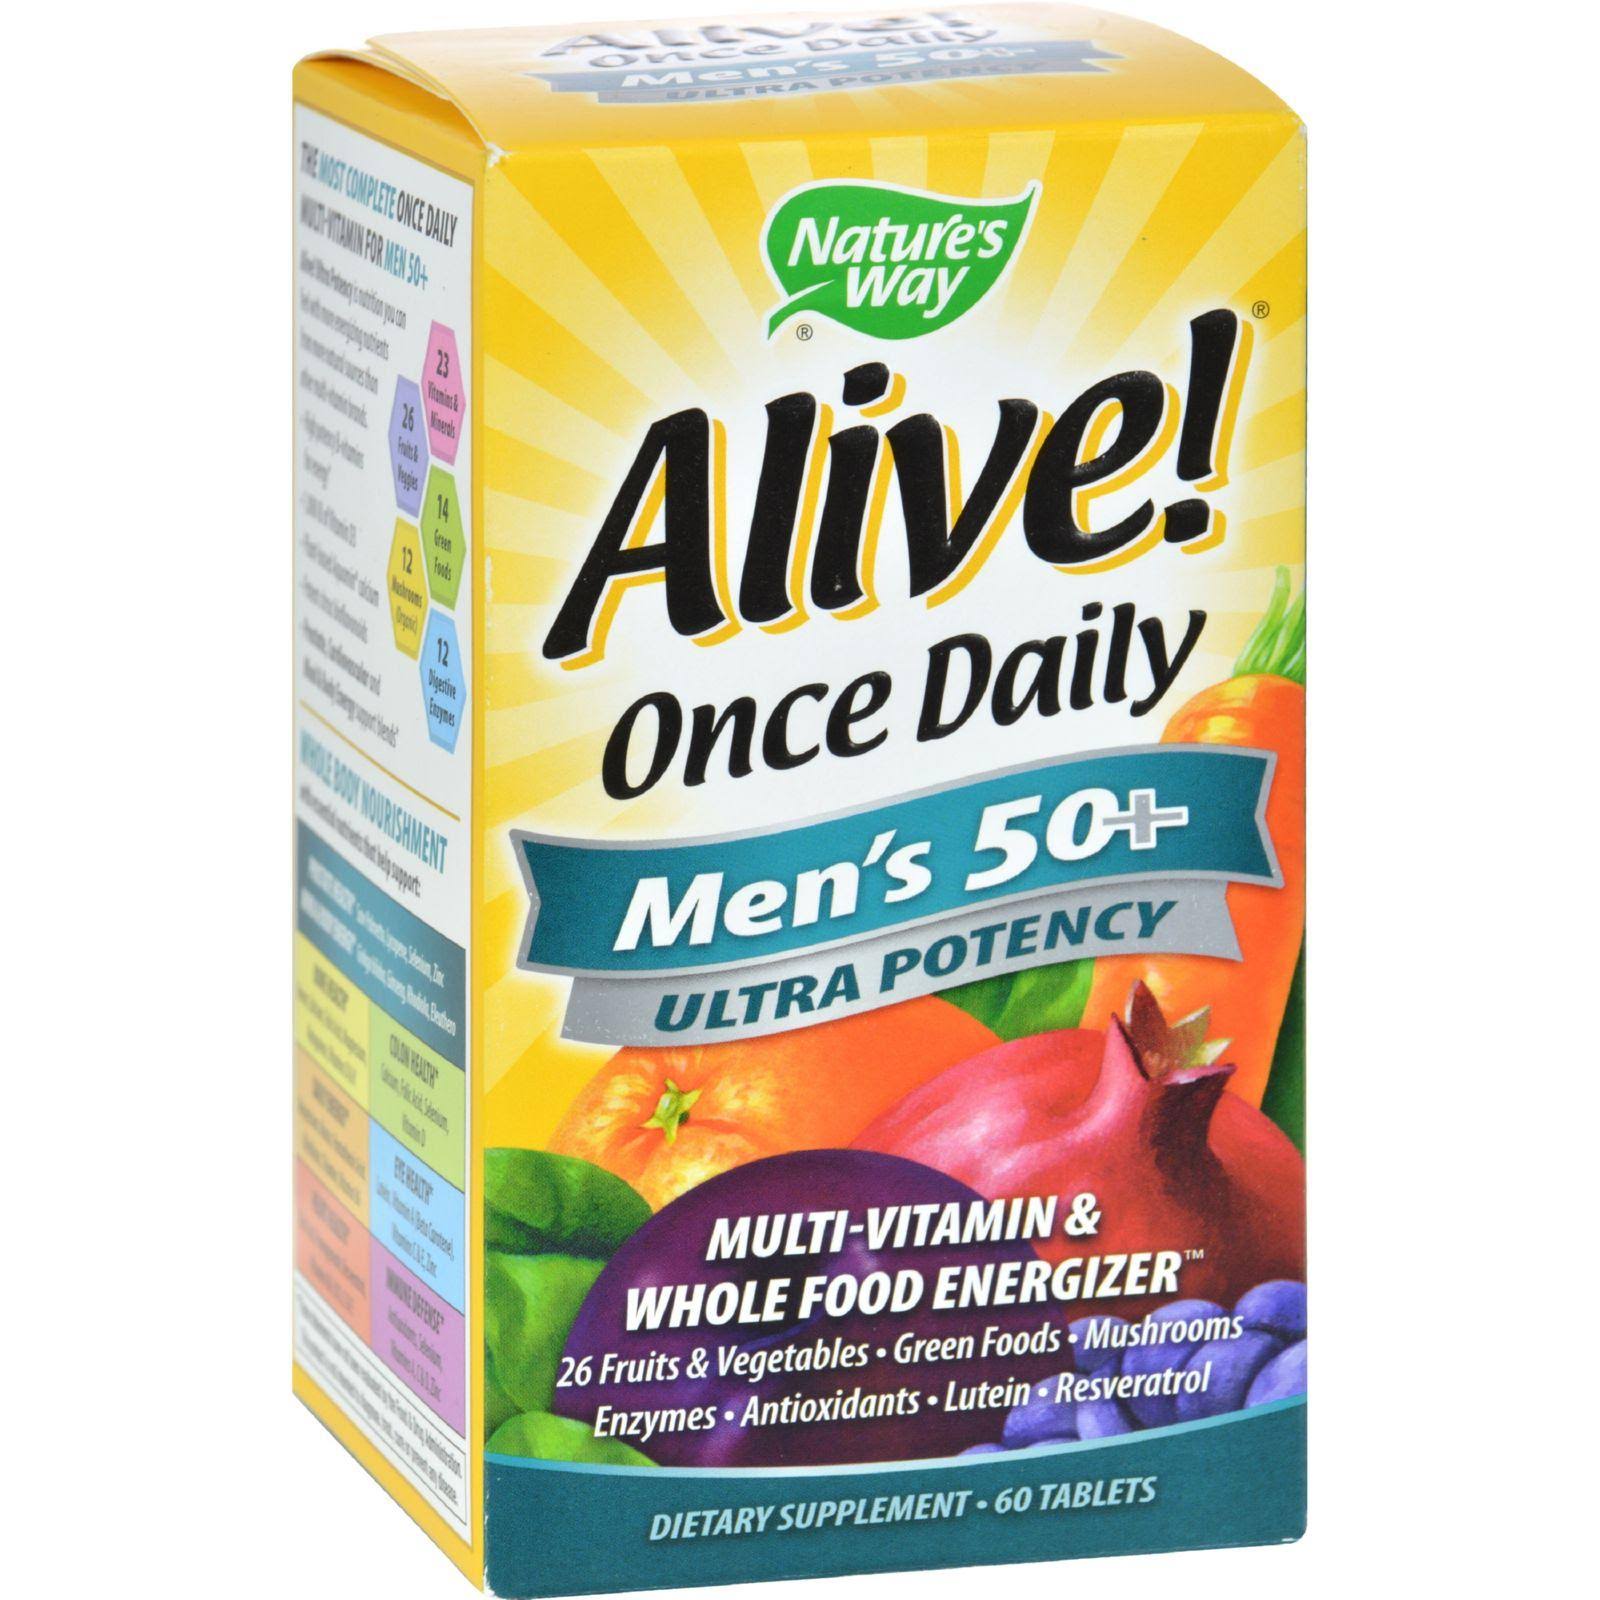 Nature's Way Alive Once Daily Men's 50+ Ultra Potency - 60 Tablets